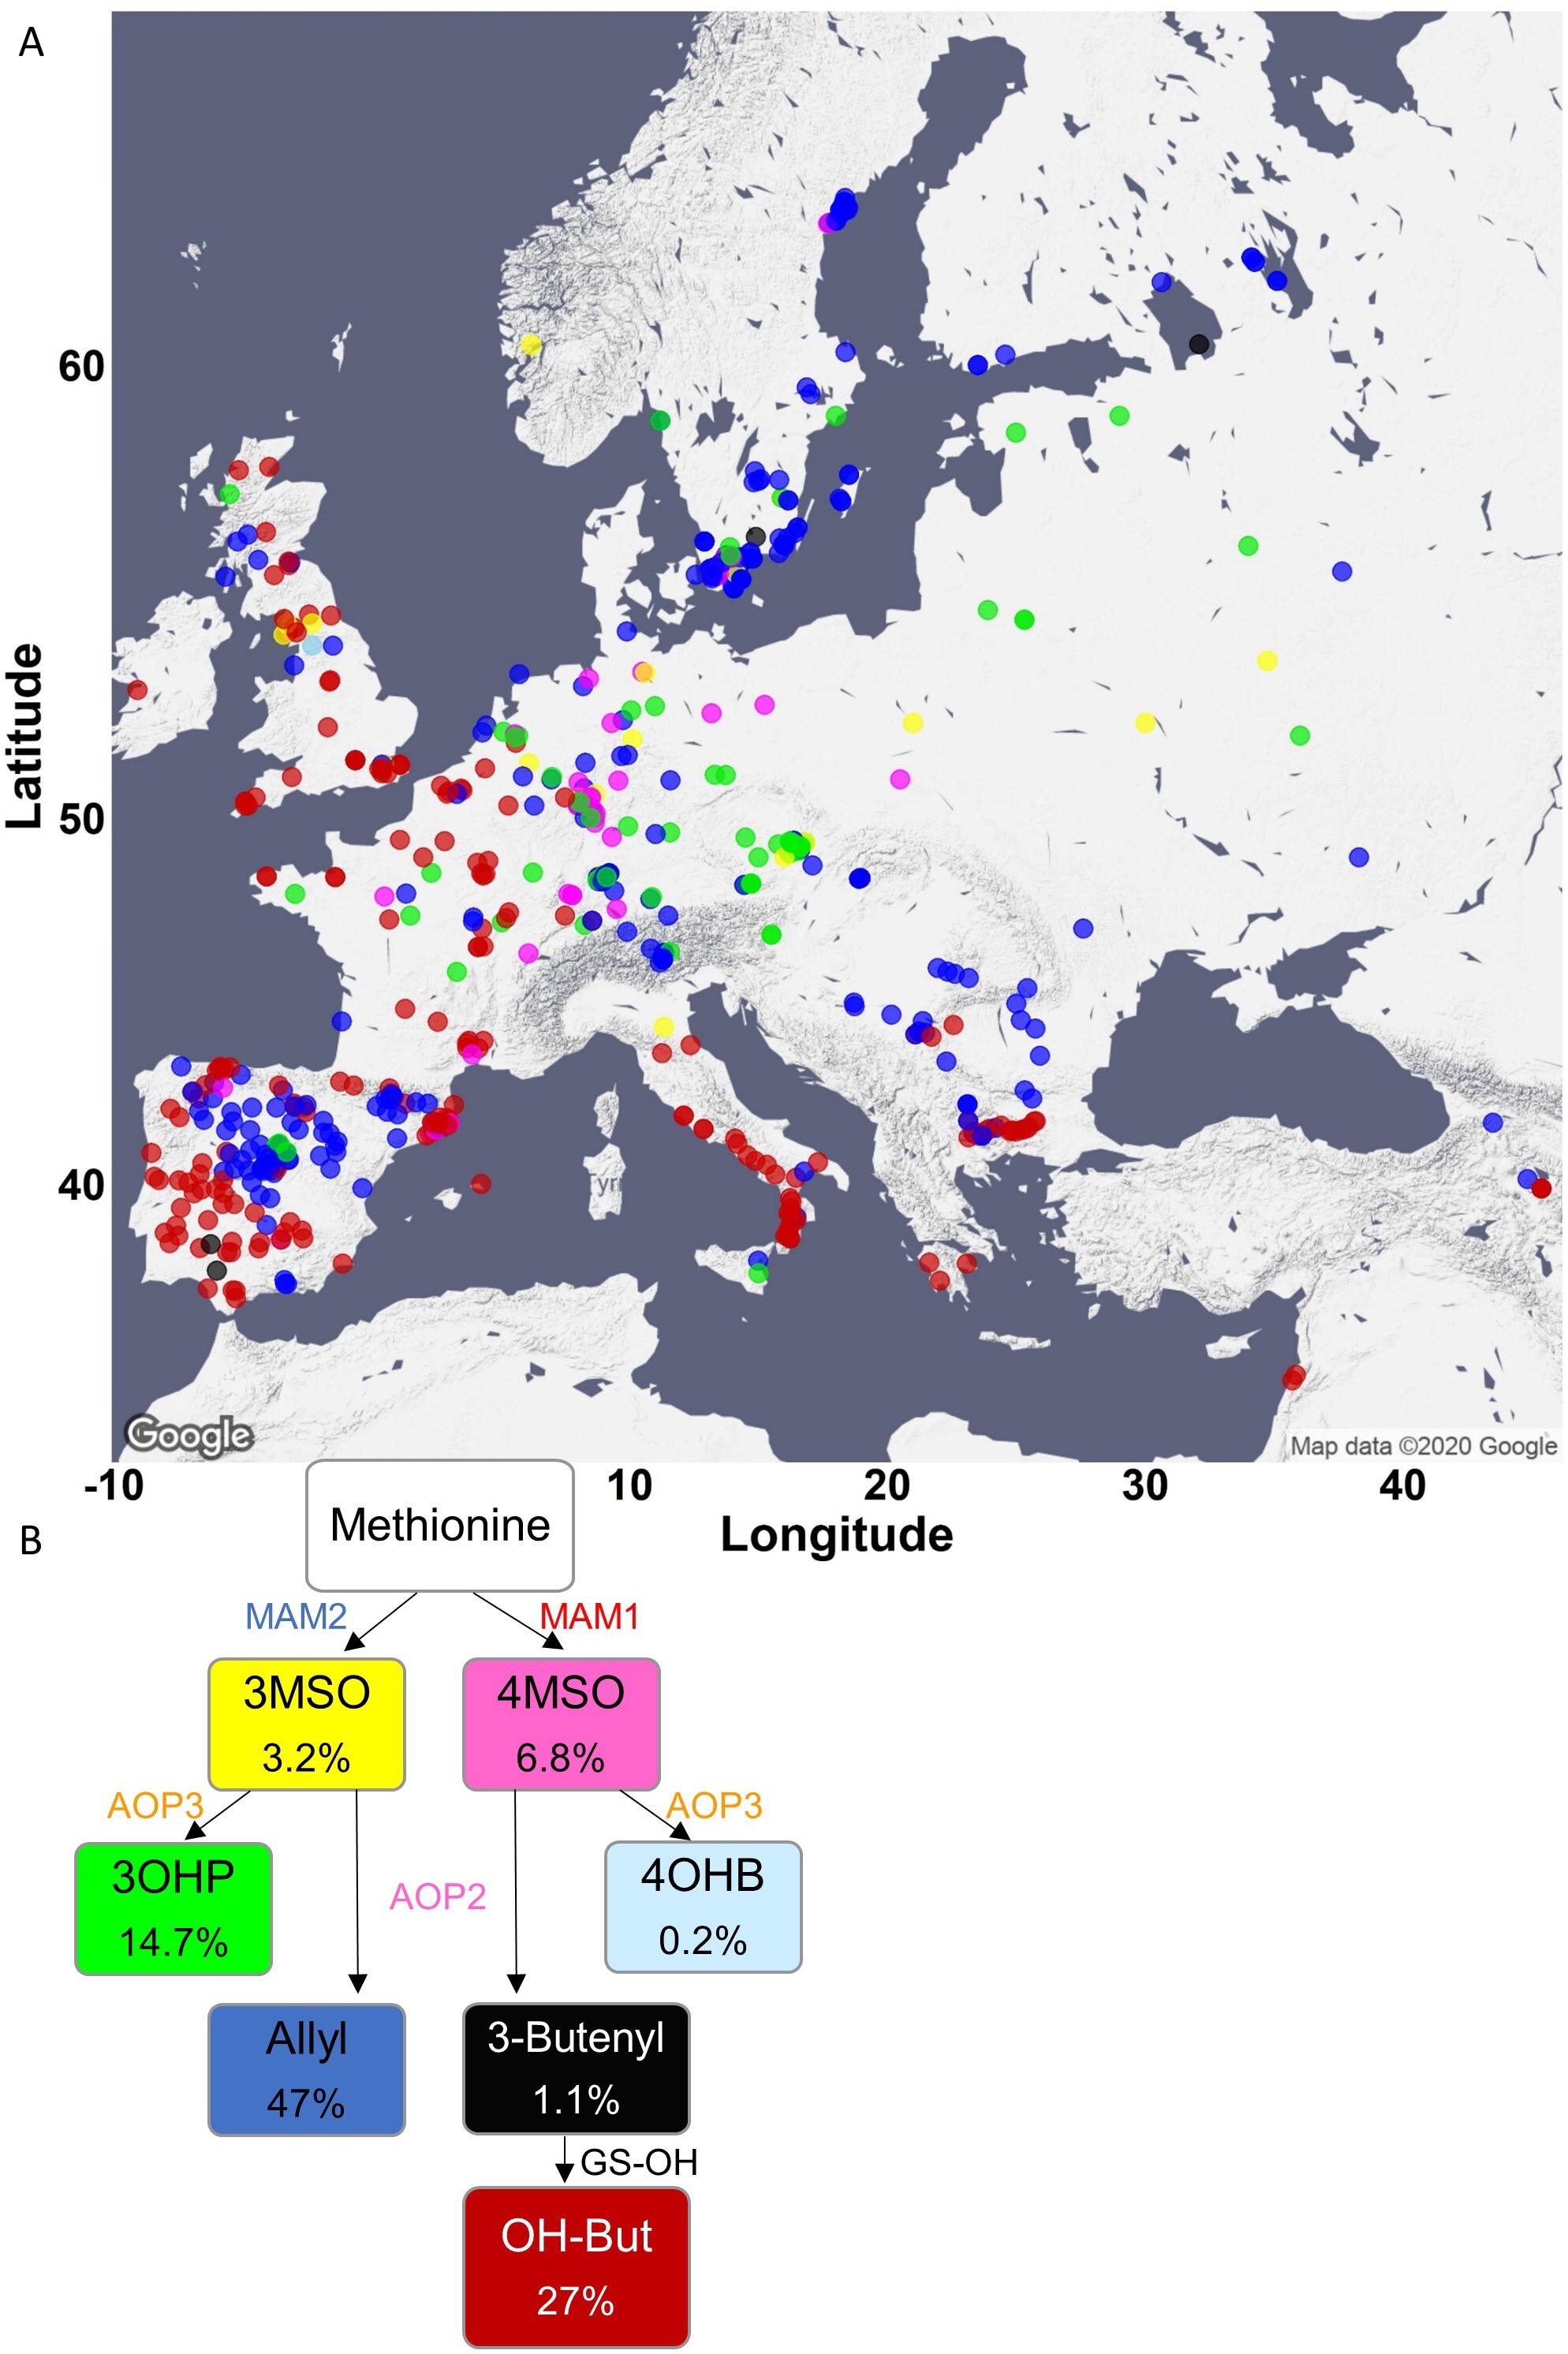 A map of Europe showing Arabidopsis genotypes and a graph showing the link between genotypes at the bottom